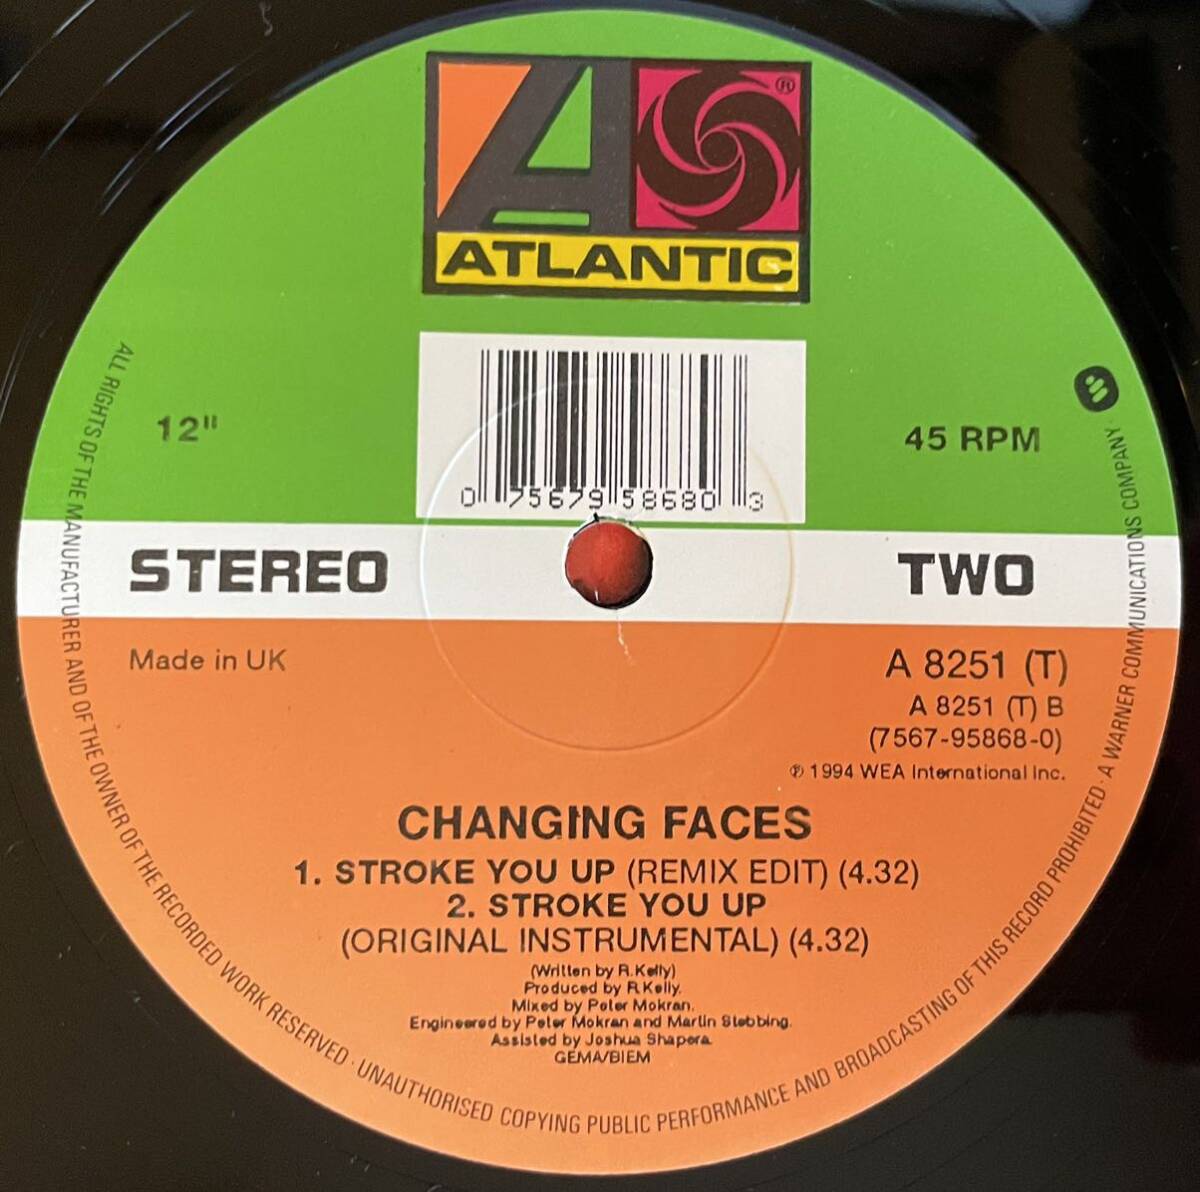 Changing Faces / Stroke You Up 12inch盤その他にもプロモーション盤 レア盤 人気レコード 多数出品。_画像4